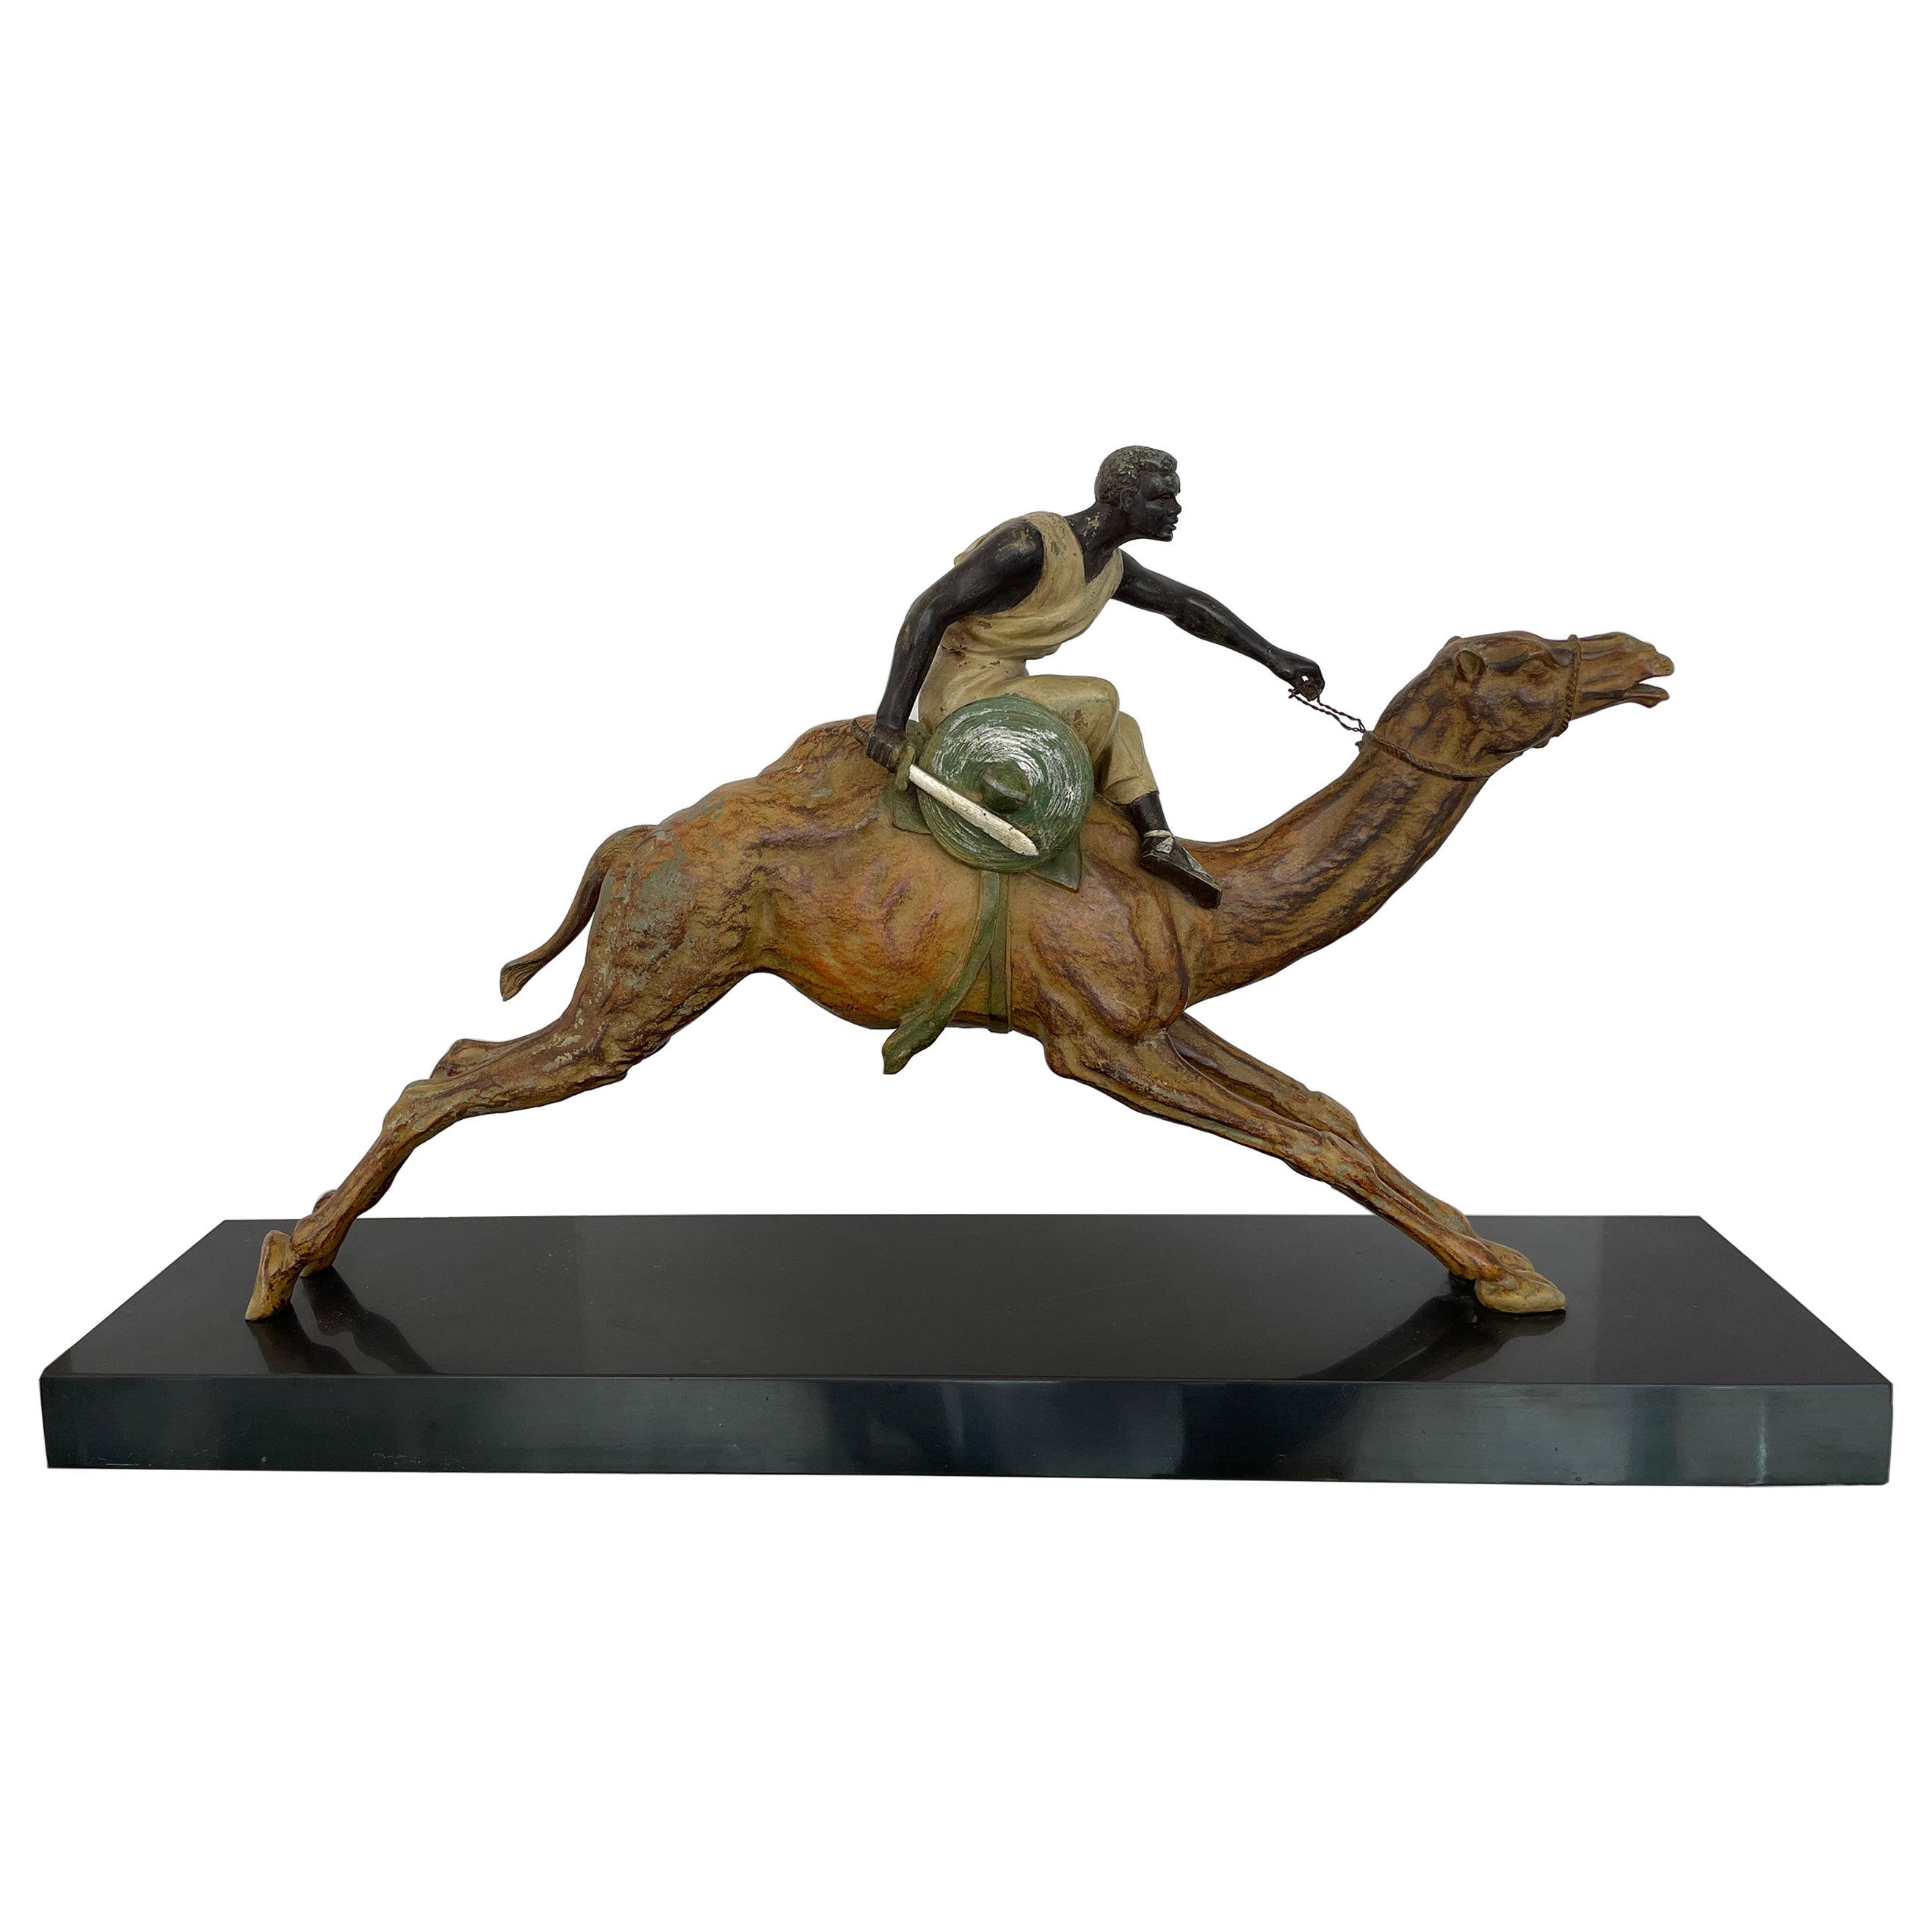 "Vienna Bronze" Style Sculpture of a Camel and Rider